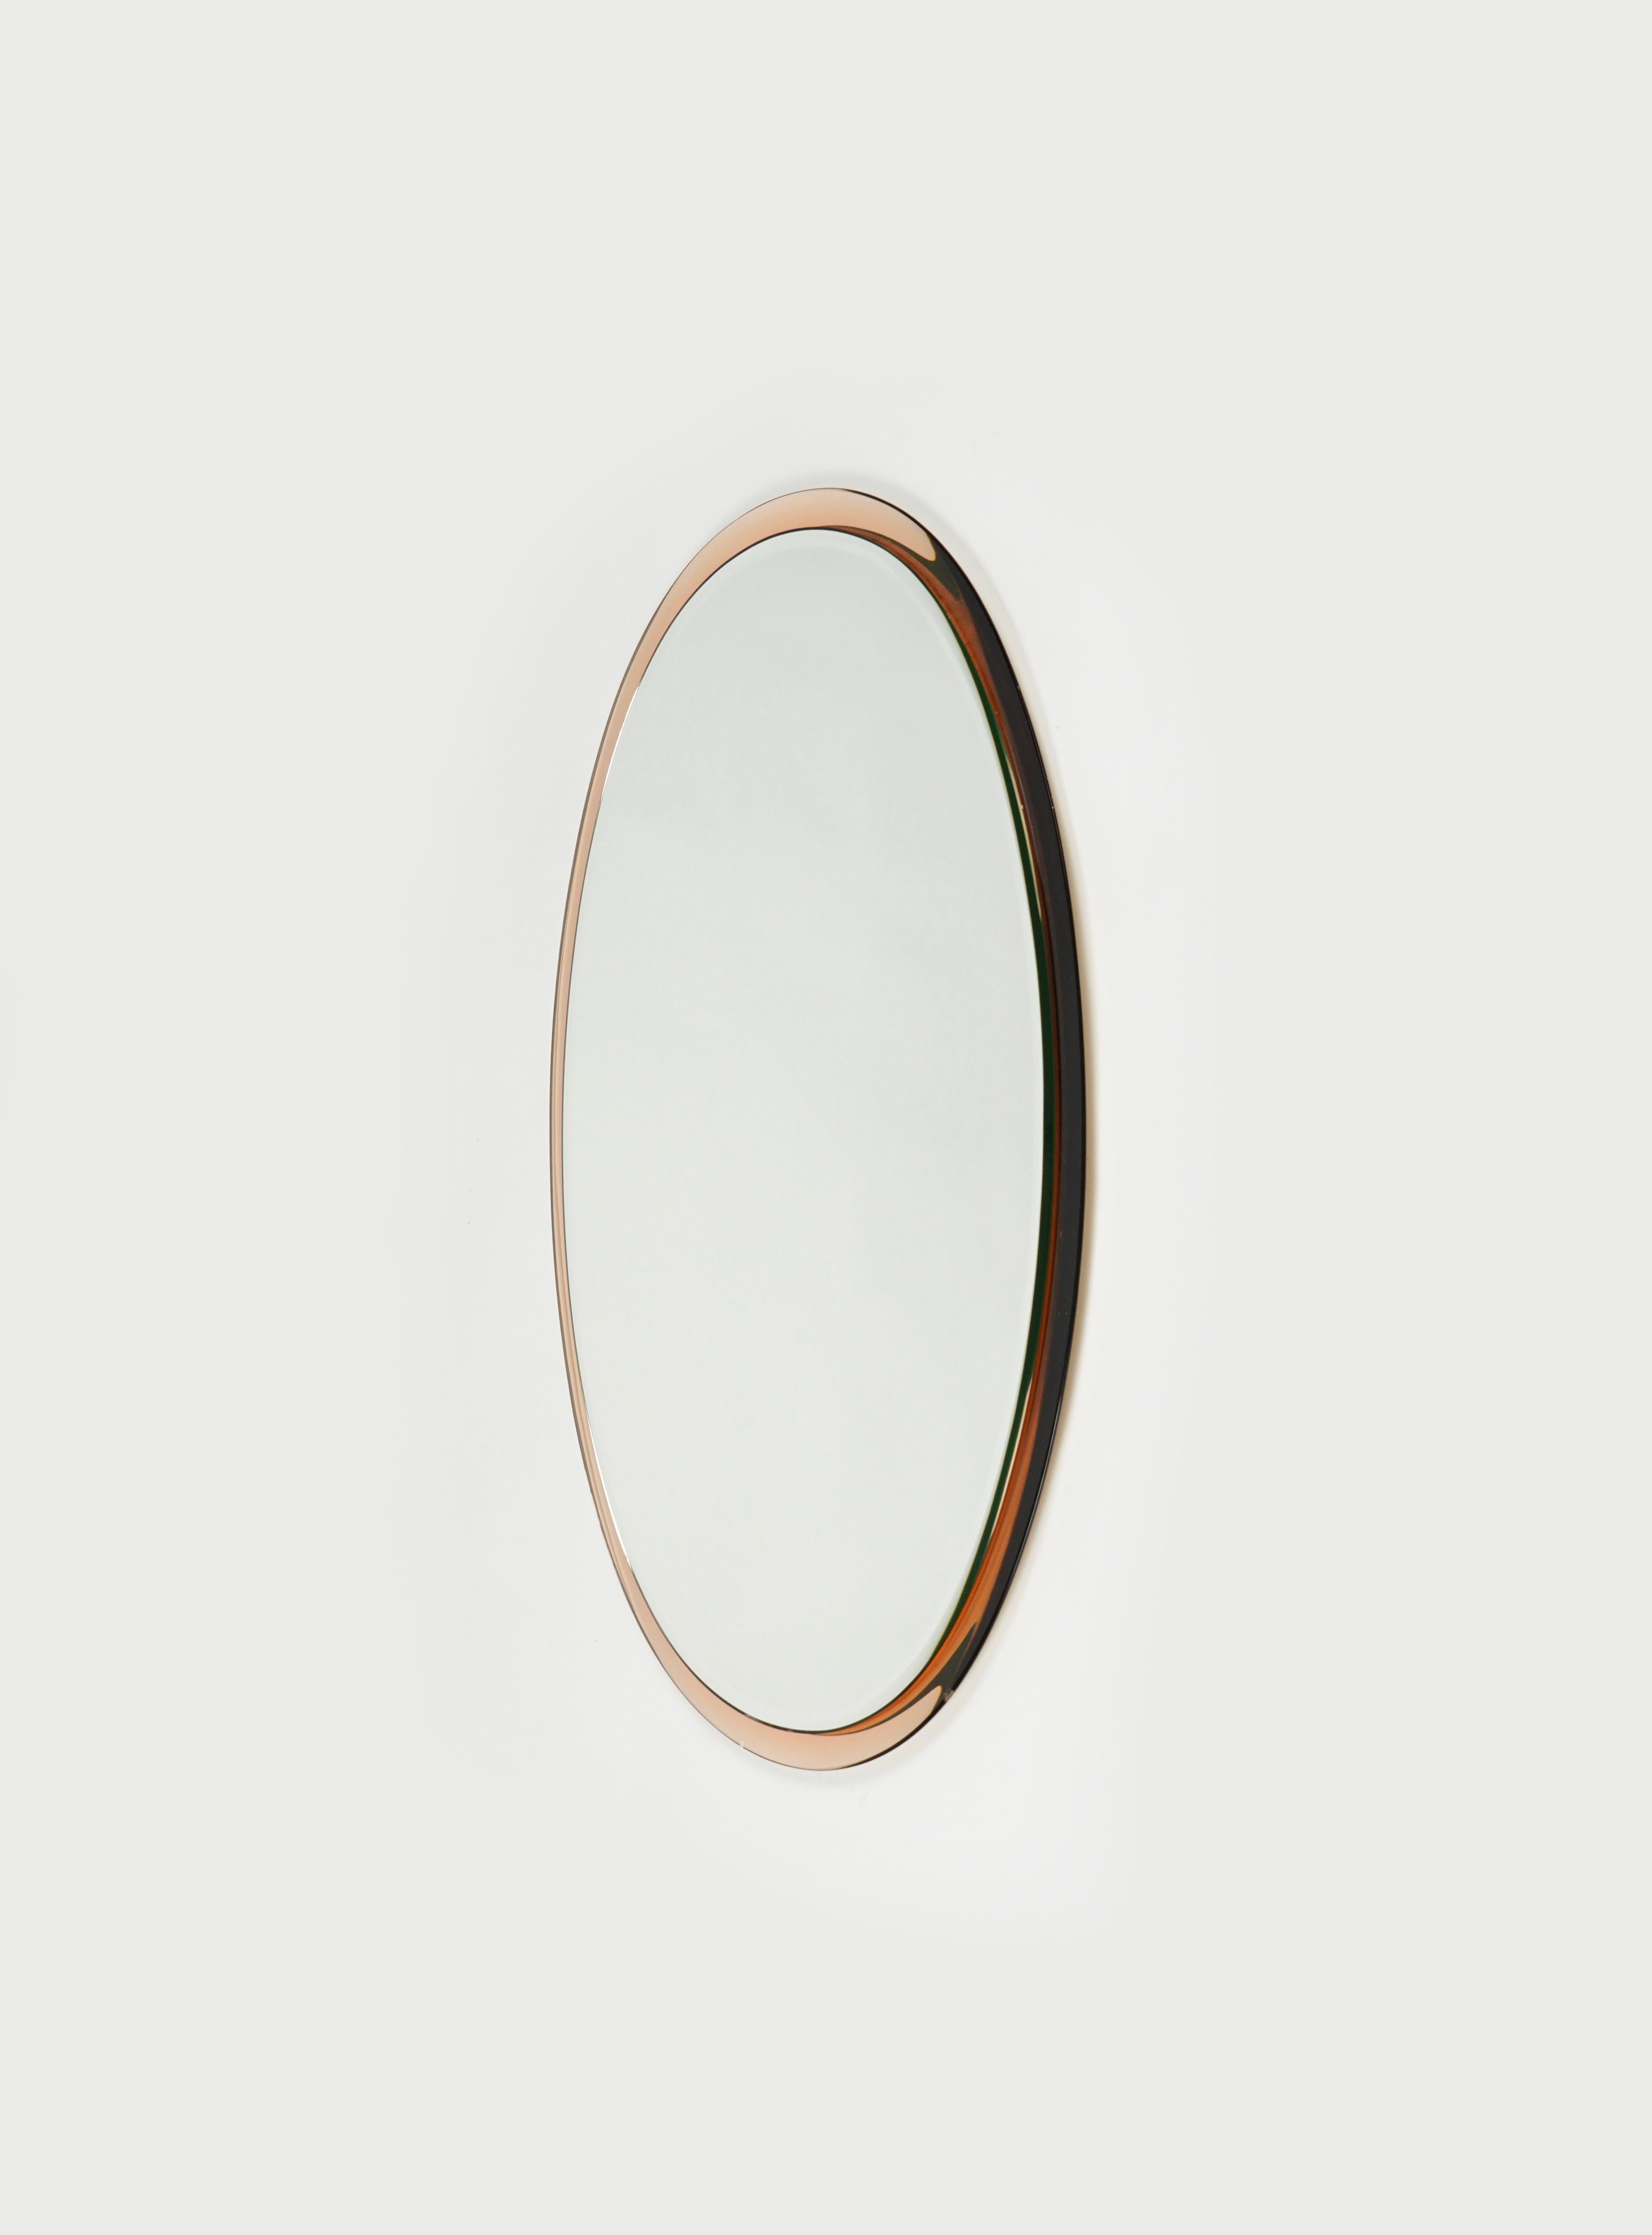 Italian Mid-Century Oval Pink Wall Mirror by Metalvetro Galvorame, Italy, 1970s For Sale